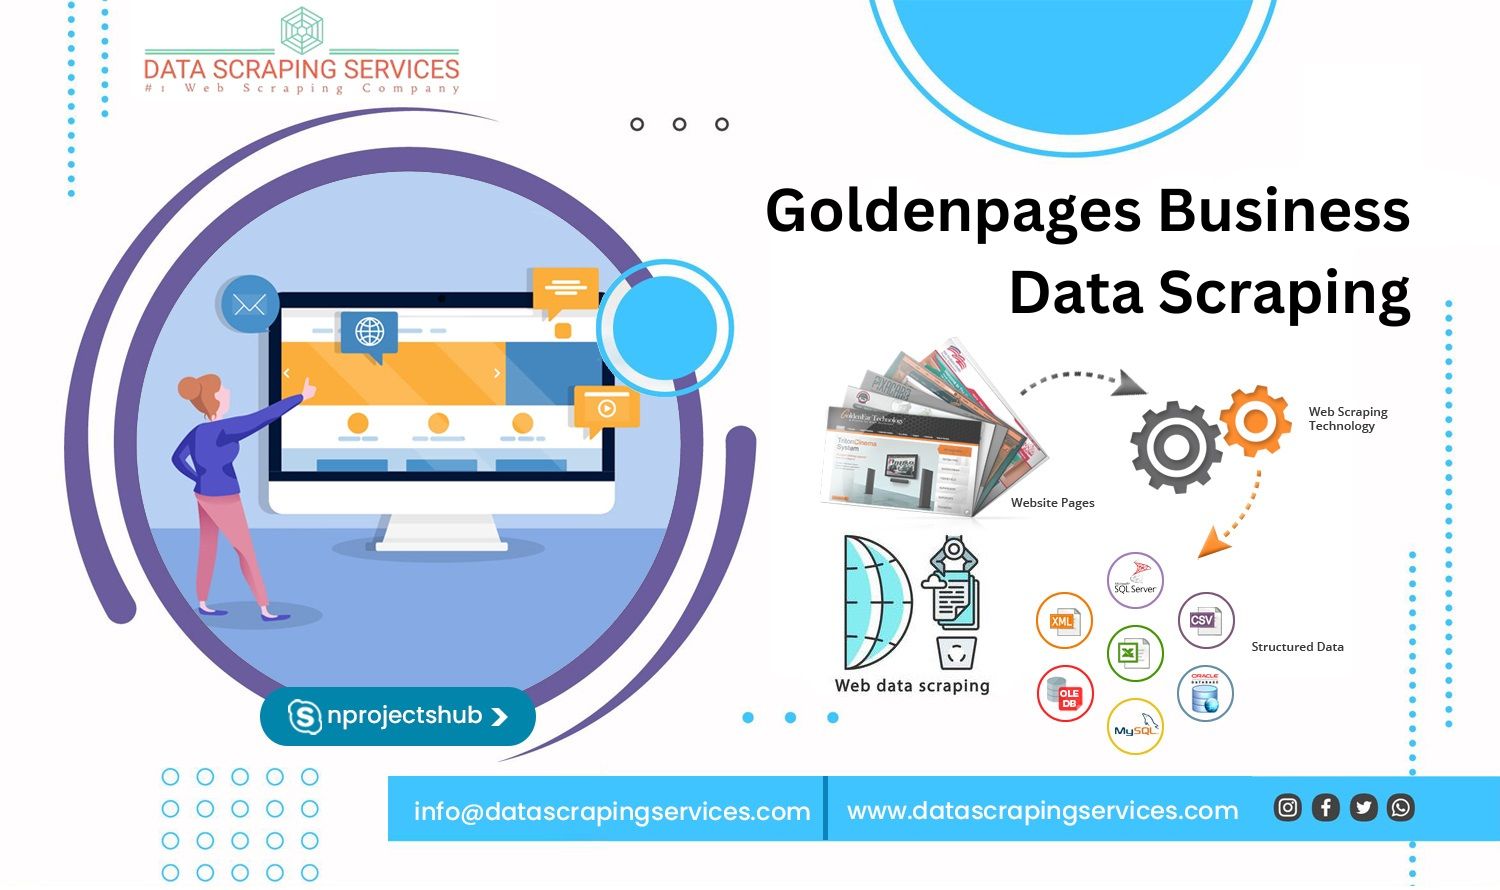 Goldenpages Business Data Scraping